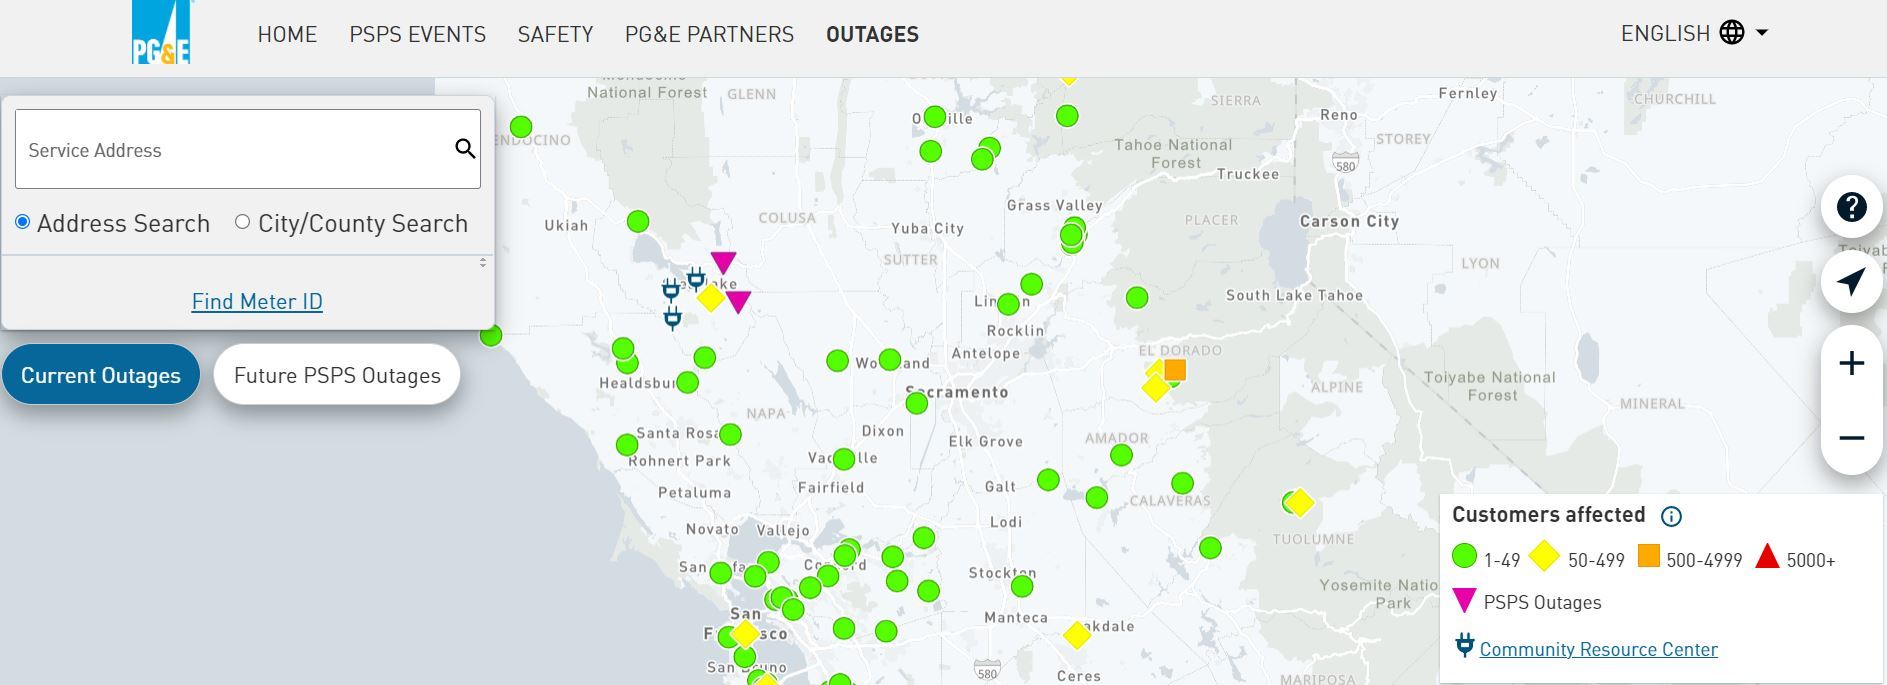 PG&E Outages